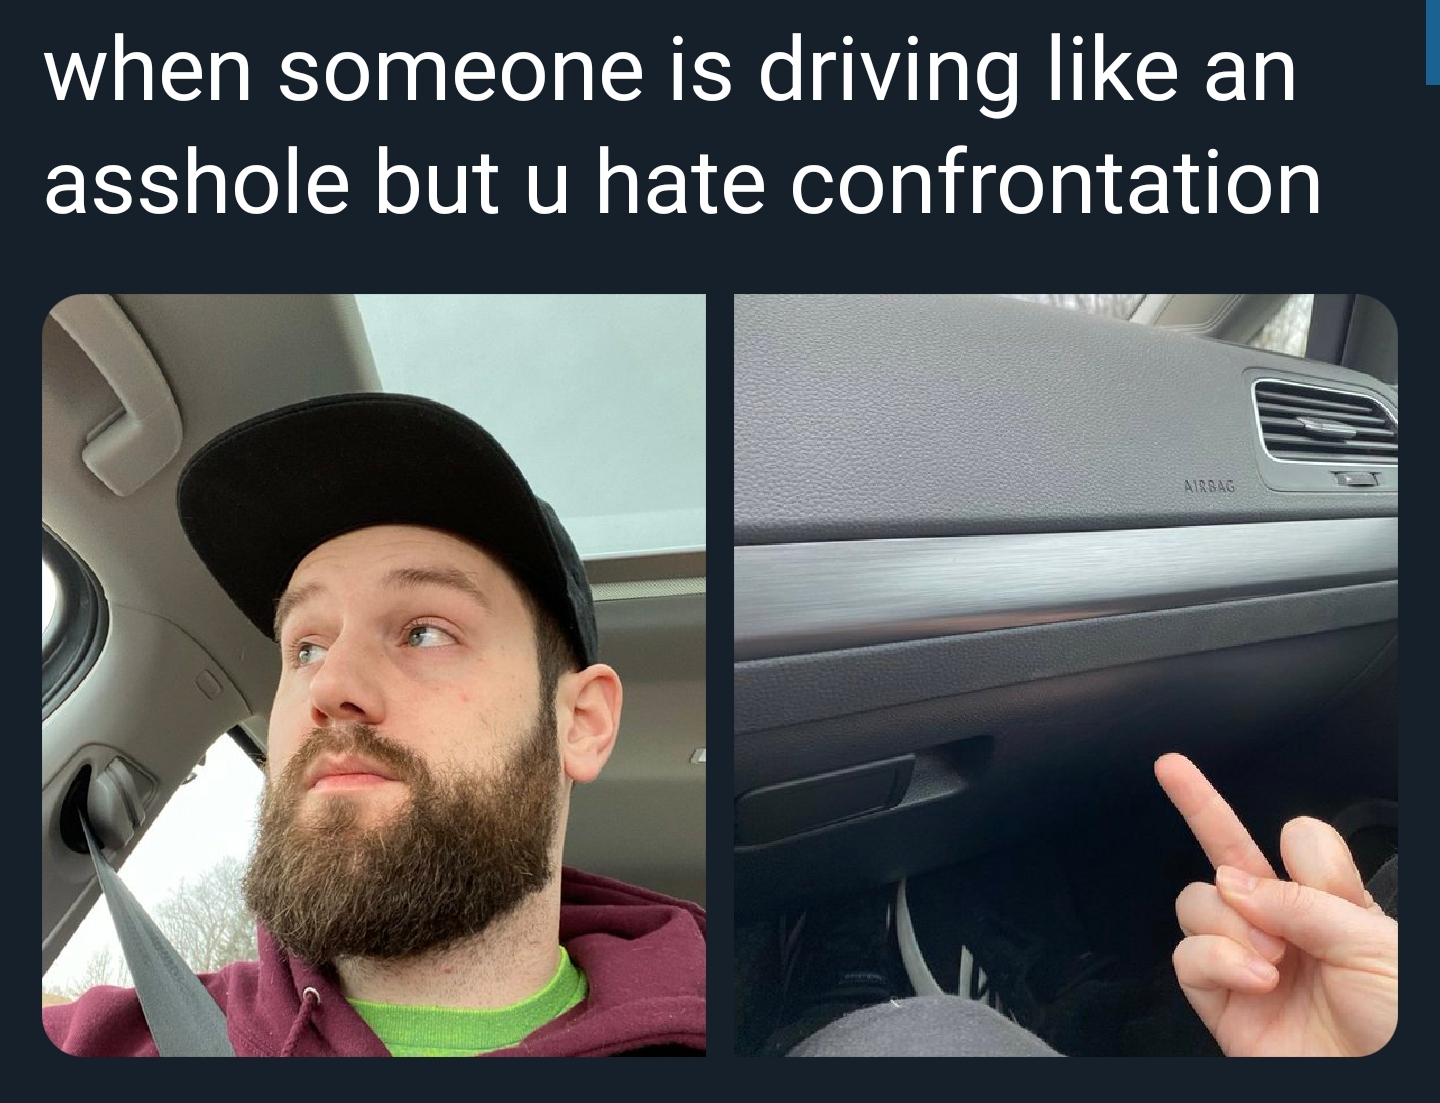 photo caption - when someone is driving an asshole but u hate confrontation